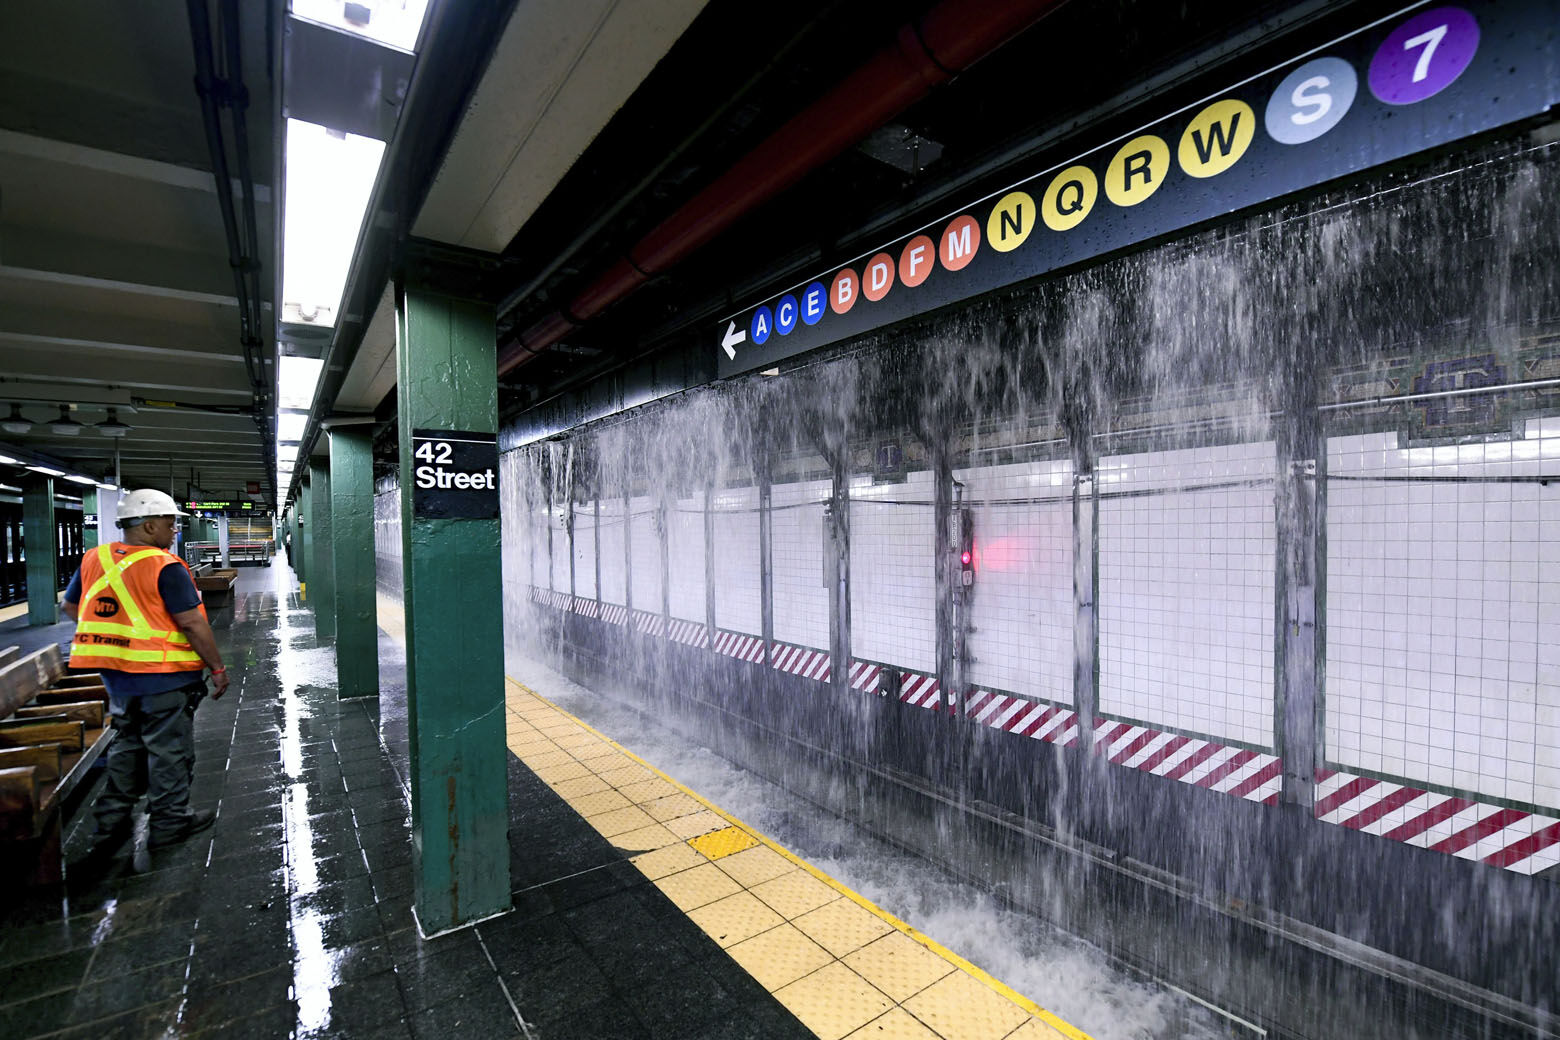 This photo, provided by MTA New York City Transit, shows water from a water main break cascading into New York's Times Square subway station, Tuesday, Aug. 29, 2023. A 127-year-old, 20-inch water main under New York's Times Square gave way early Tuesday, flooding midtown streets and the city's busiest subway station. (Marc A. Hermann/MTA, via AP)